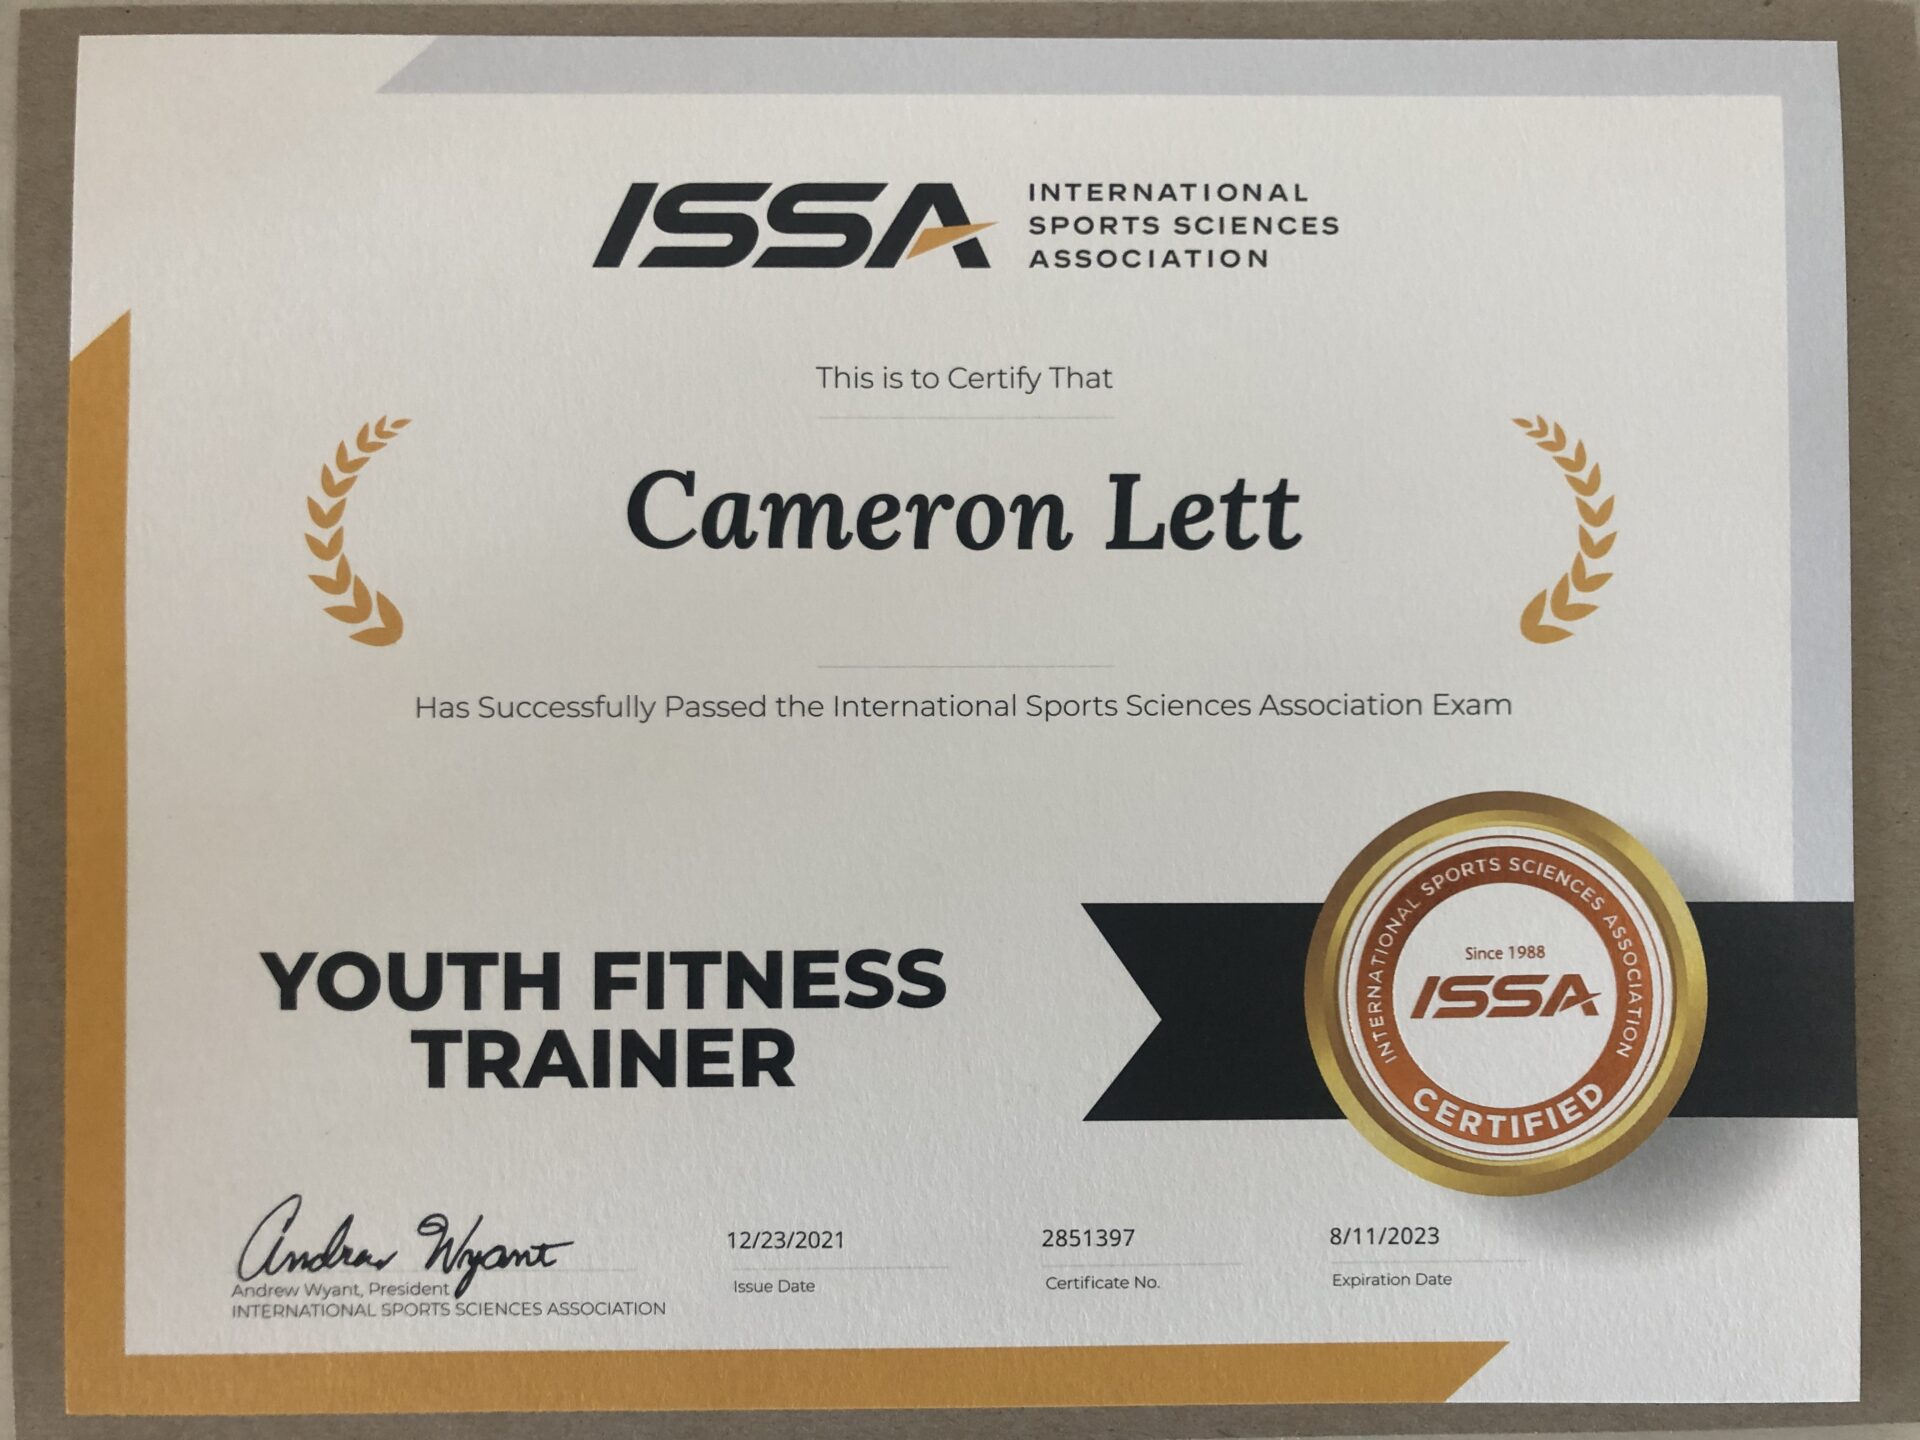 Youth fitness trainer certification